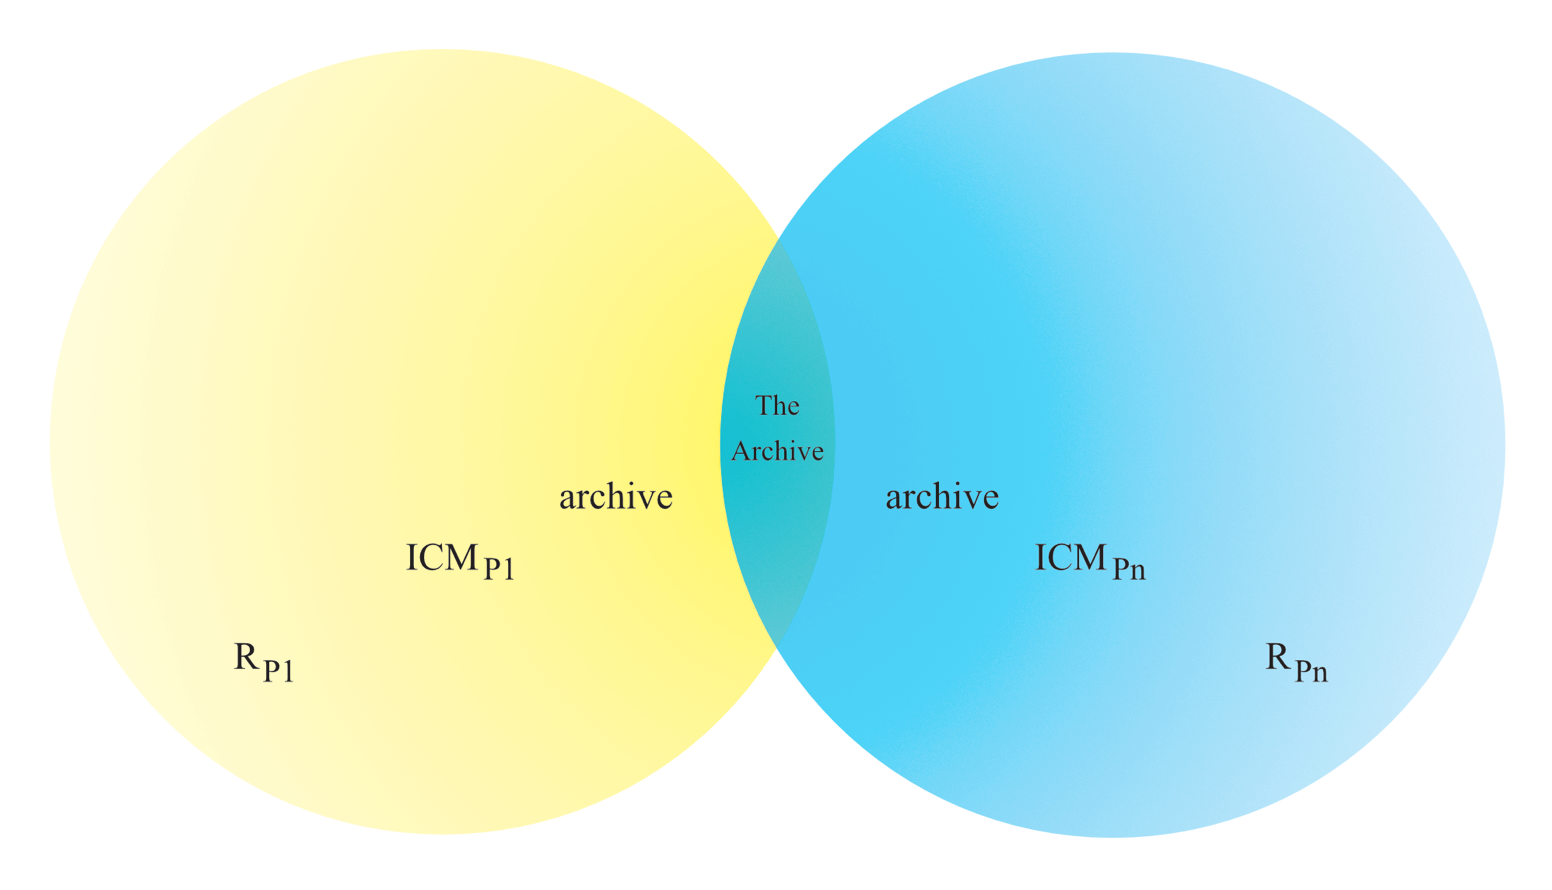 This is a Venn diagram of the intersection between people’s experience of reality. On the left, a pale yellow circle darkens in gradation from left to right. On the right, a pale blue circle darkens right to left. Their intersection (in their darker portions) is a green area identified as The Archive. The following labels appear in each circle at increasing distances from that central intersection: archive, ICM sub P sub n, and R sub P sub n.